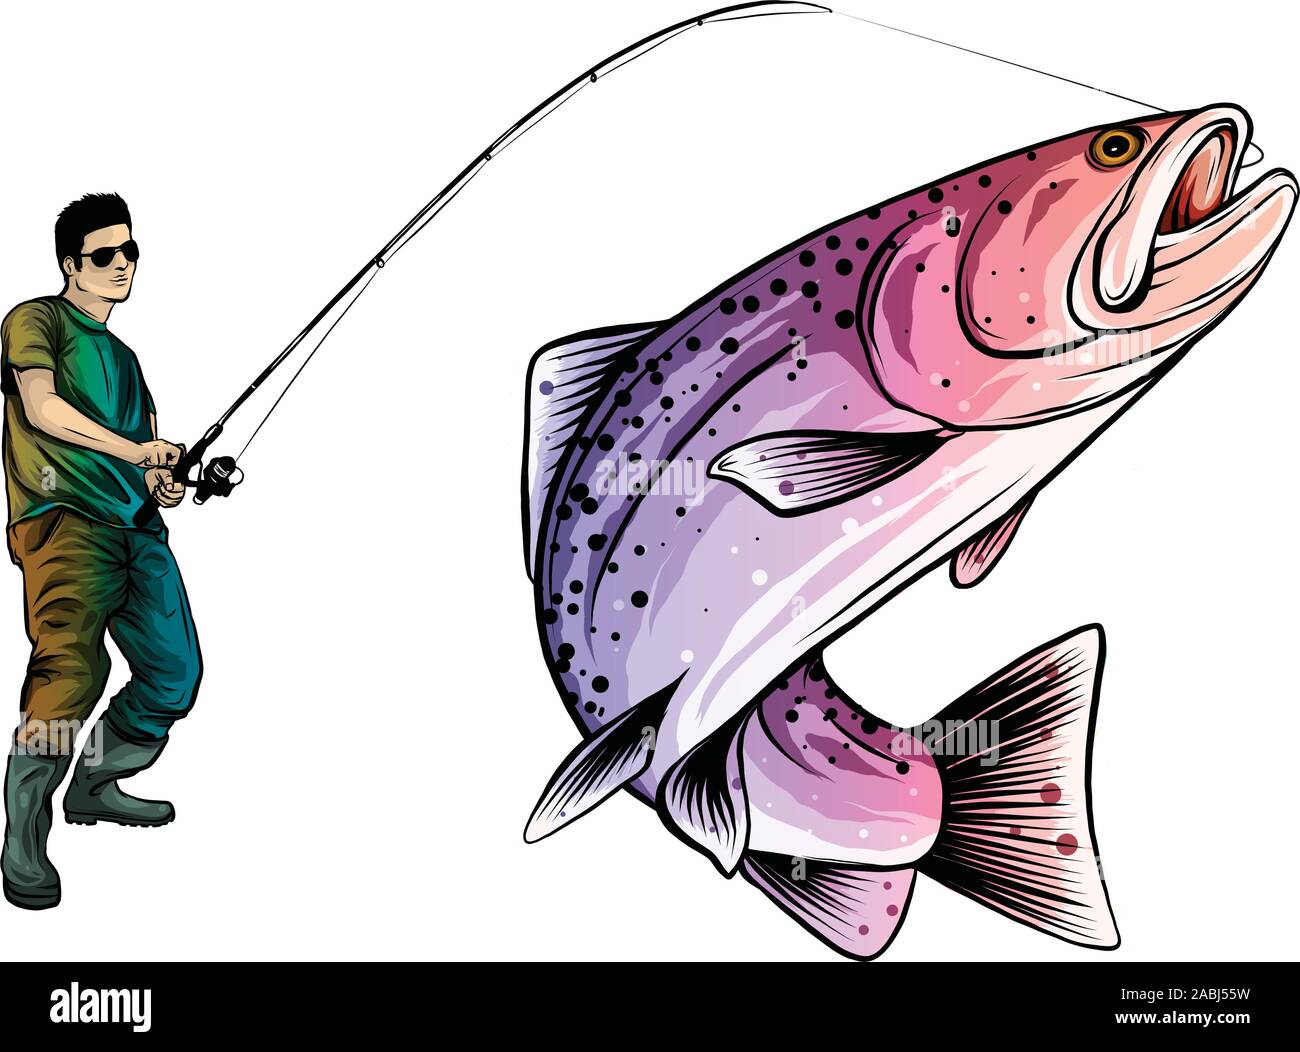 Fishing design for vector. A fisherman catches a boat on a wave. Stock Vector